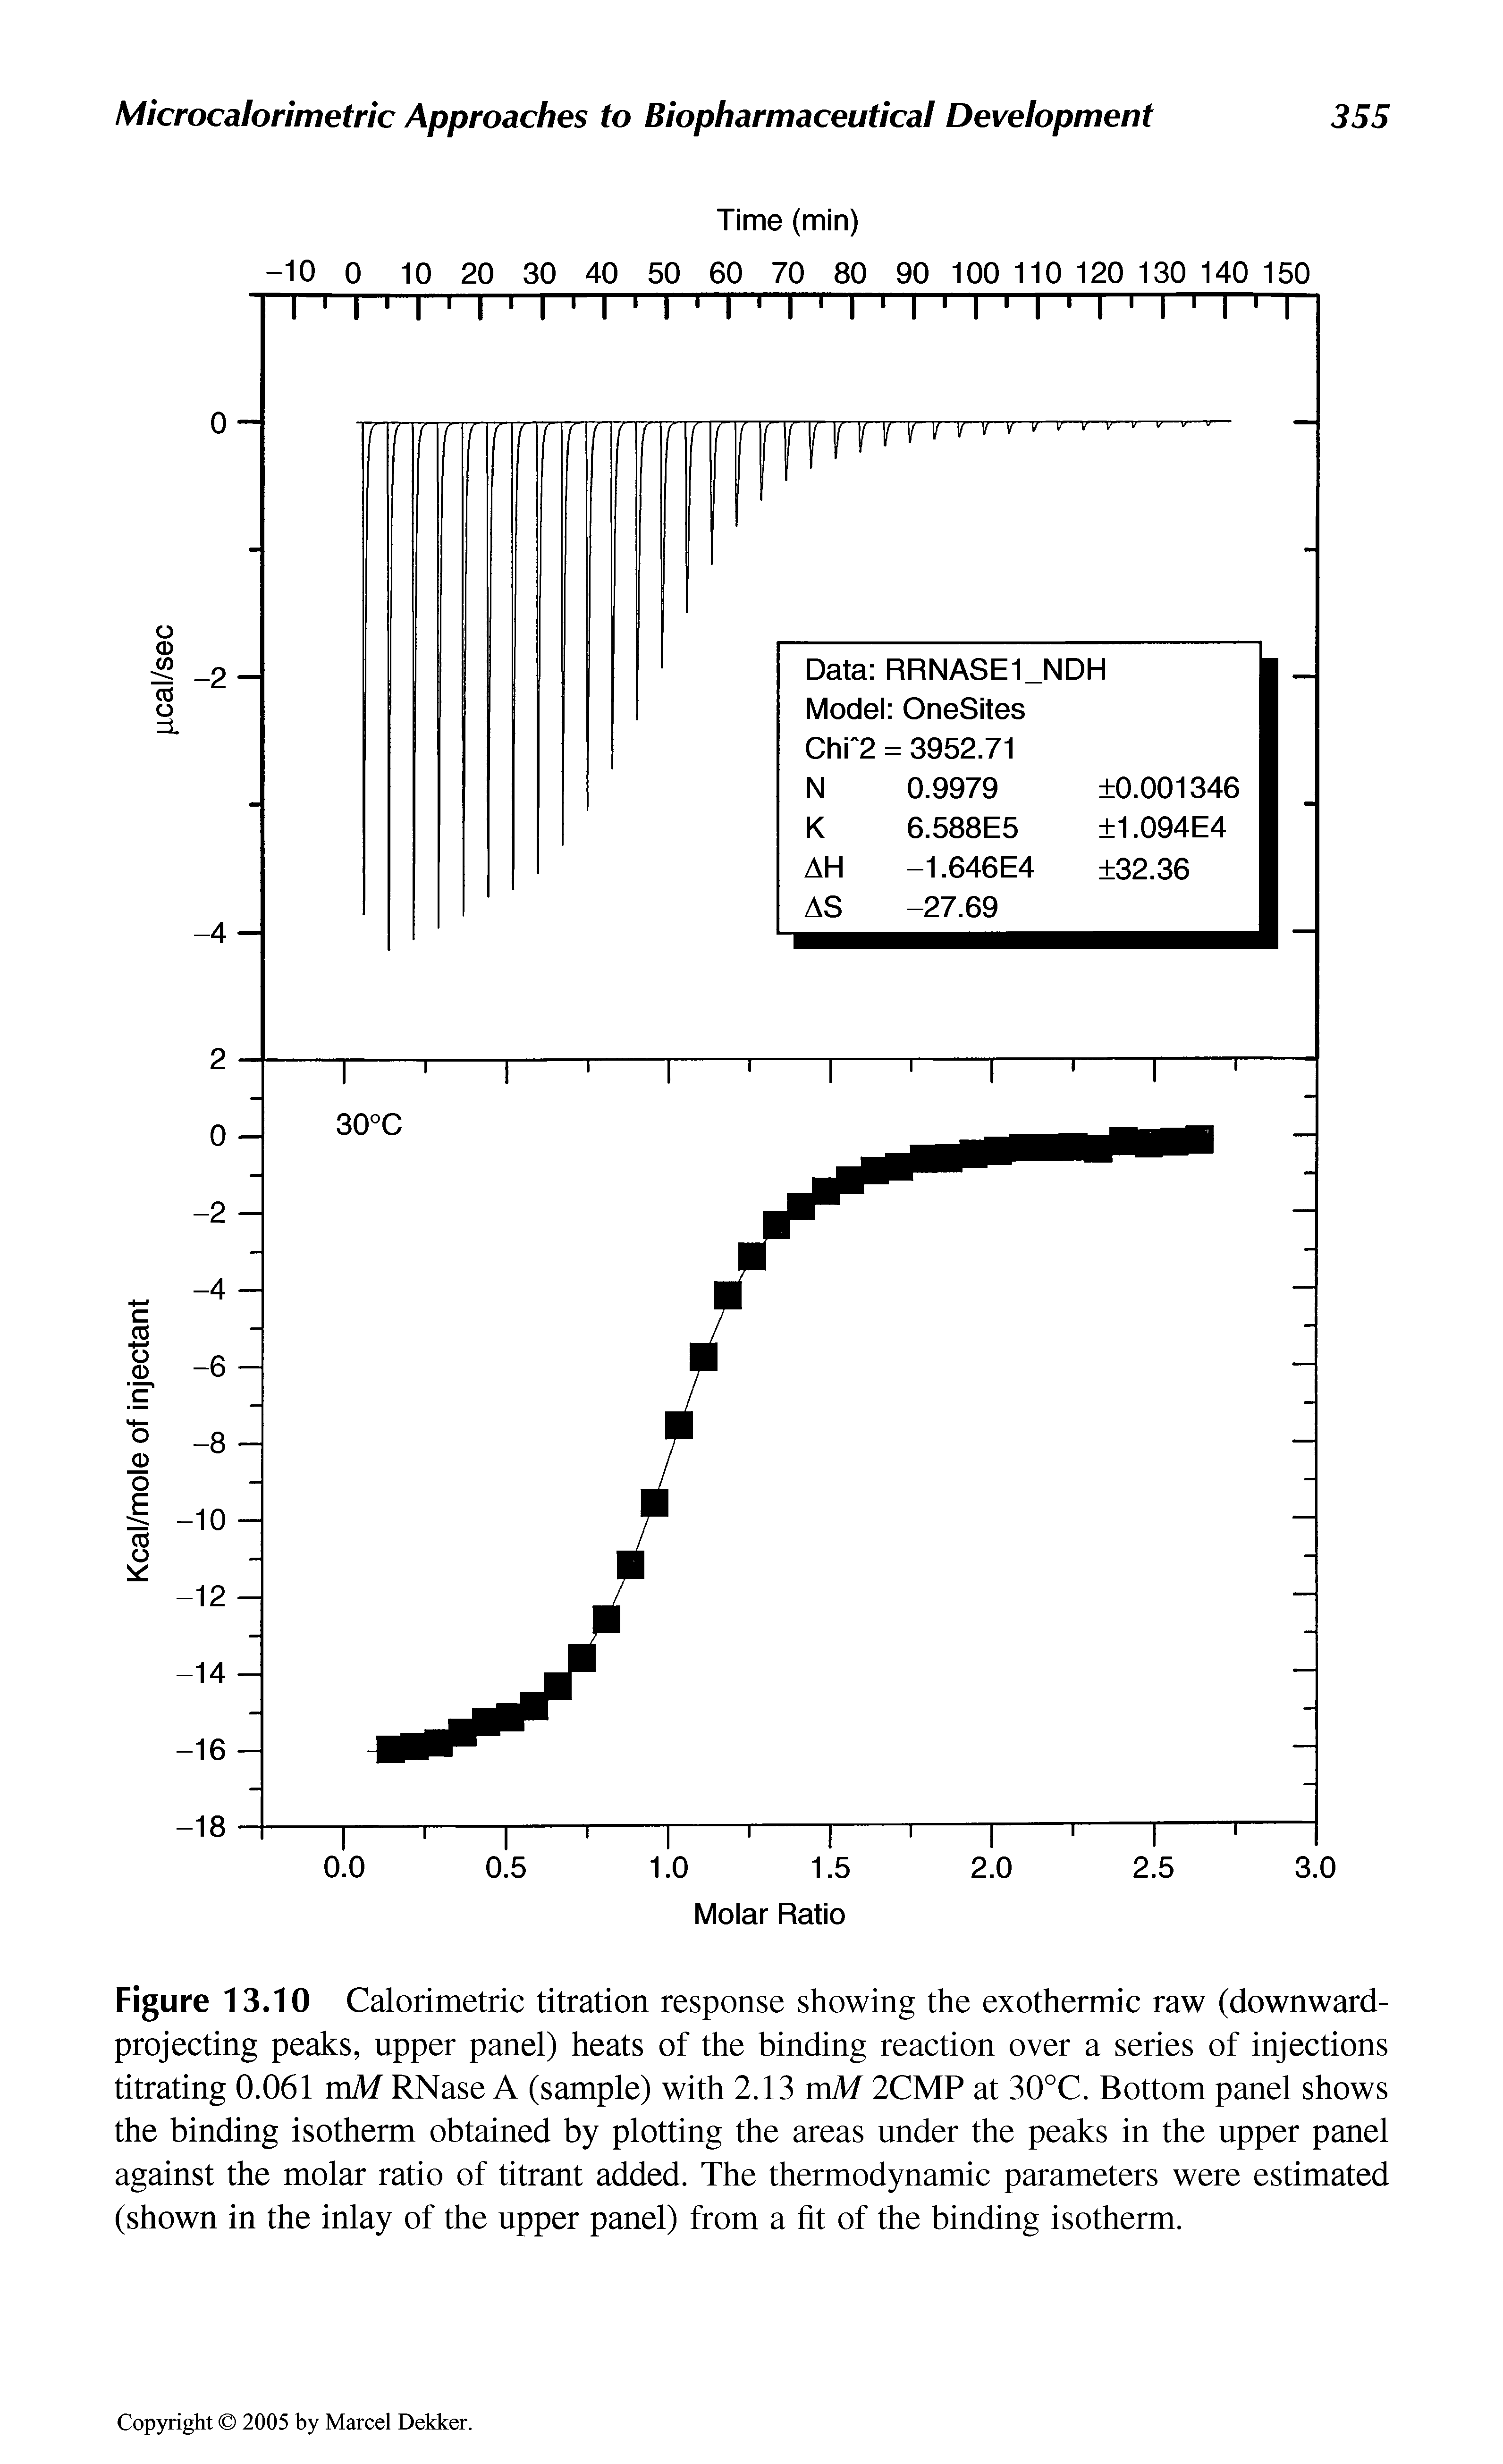 Figure 13.10 Calorimetric titration response showing the exothermic raw (downward-projecting peaks, upper panel) heats of the binding reaction over a series of injections titrating 0.061 mM RNase A (sample) with 2.13 mM 2CMP at 30°C. Bottom panel shows the binding isotherm obtained by plotting the areas under the peaks in the upper panel against the molar ratio of titrant added. The thermodynamic parameters were estimated (shown in the inlay of the upper panel) from a fit of the binding isotherm.